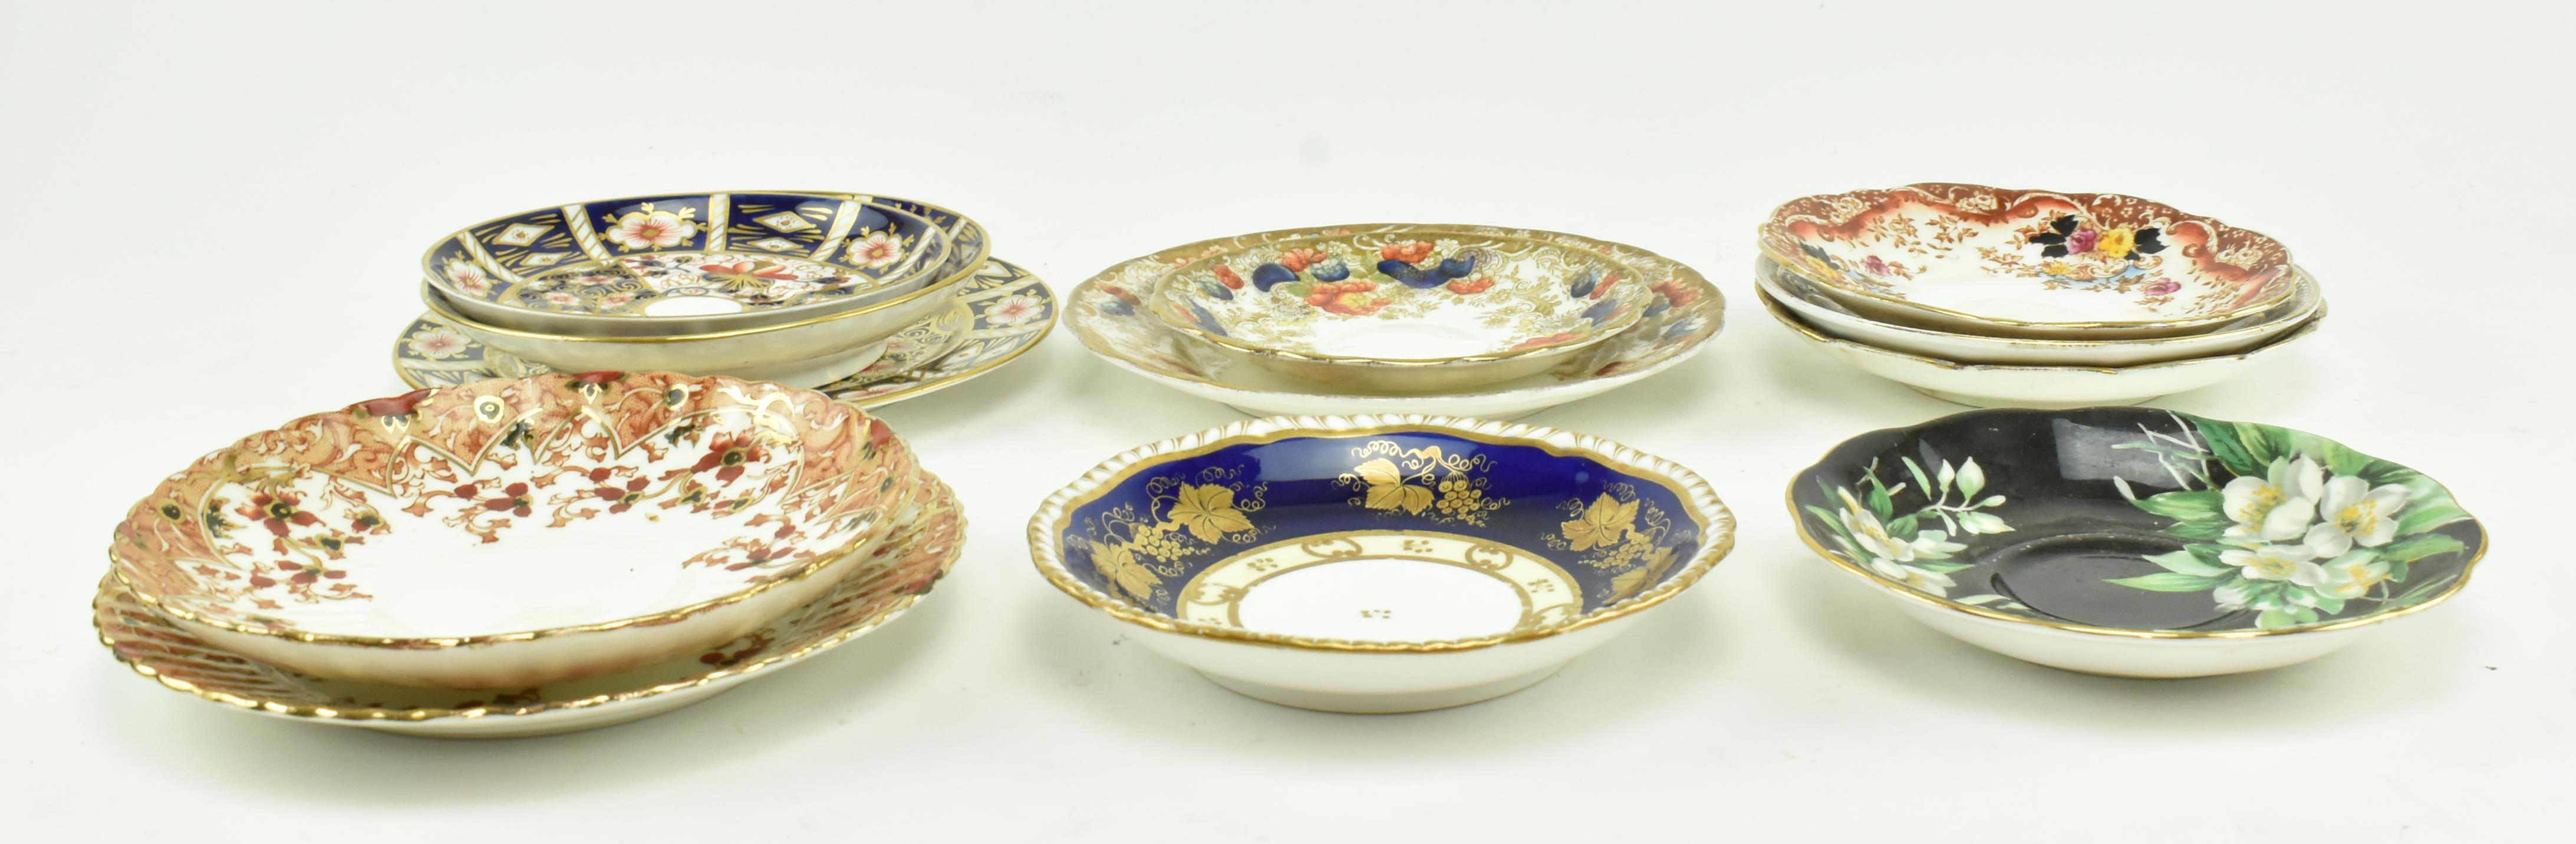 COLLECTION OF 19TH CENTURY PORCELAIN TEACUPS & SAUCERS - Image 5 of 13